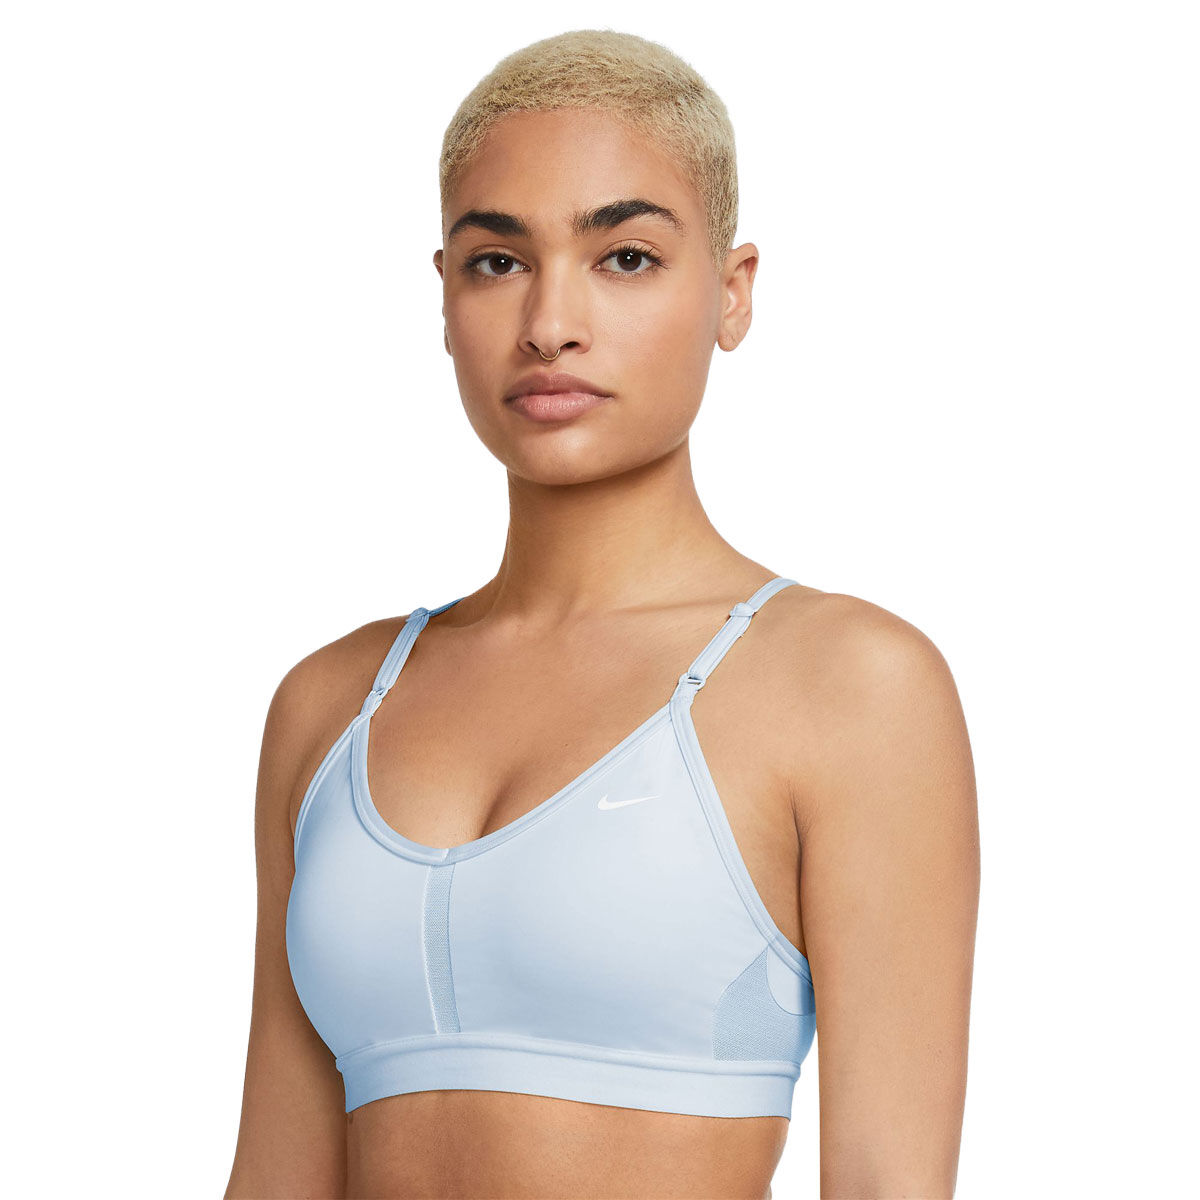  Nike Women's Victory Padded Sports Bra, Dri-FIT Sports Bra for  Women with Racerback Design, Black/White, X-small. : Sports & Outdoors